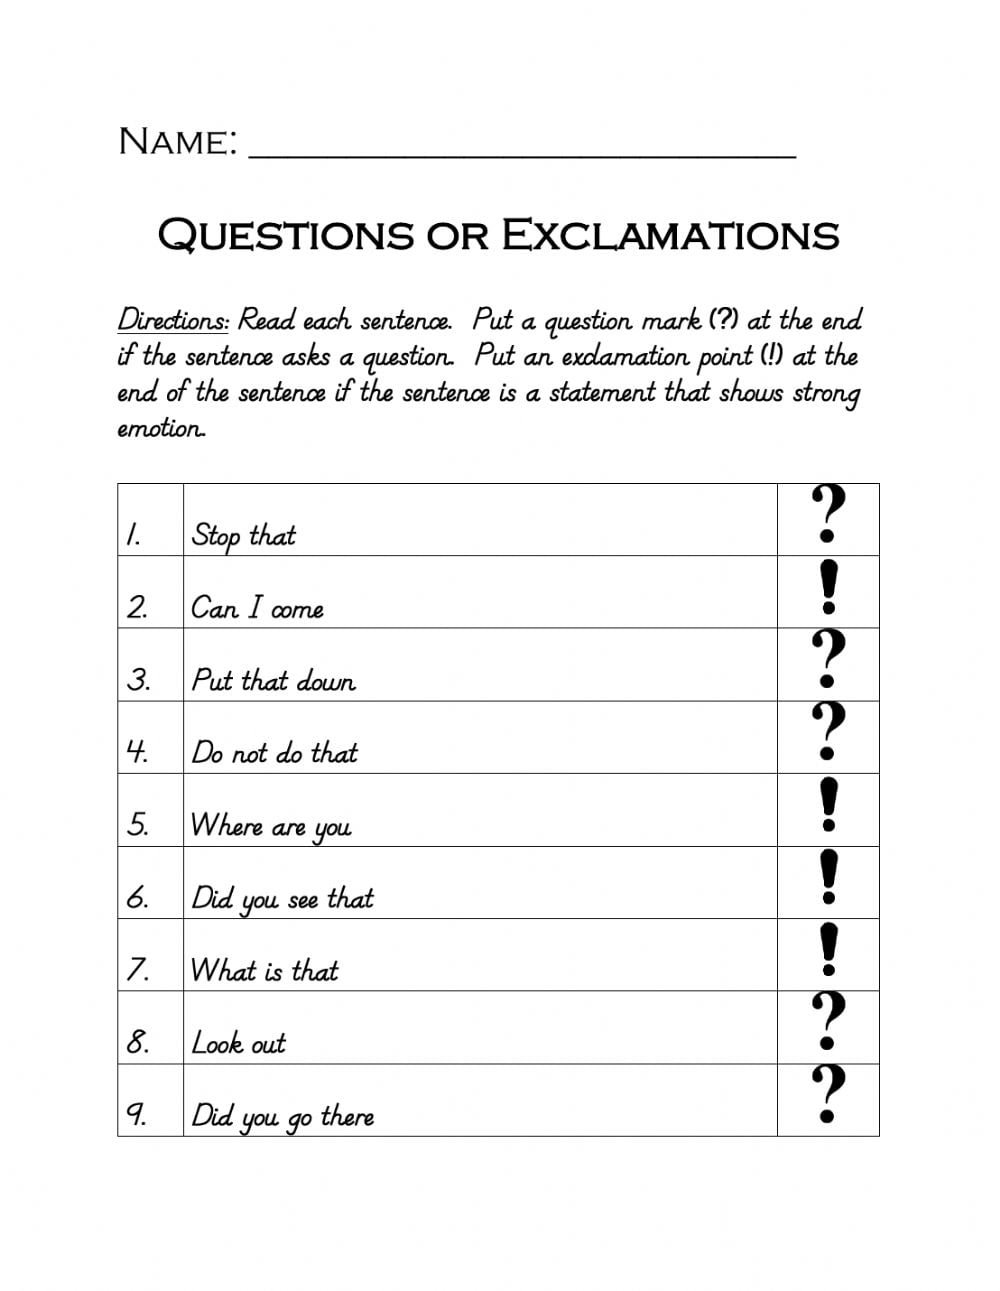 exclamations-worksheets-worksheetscity